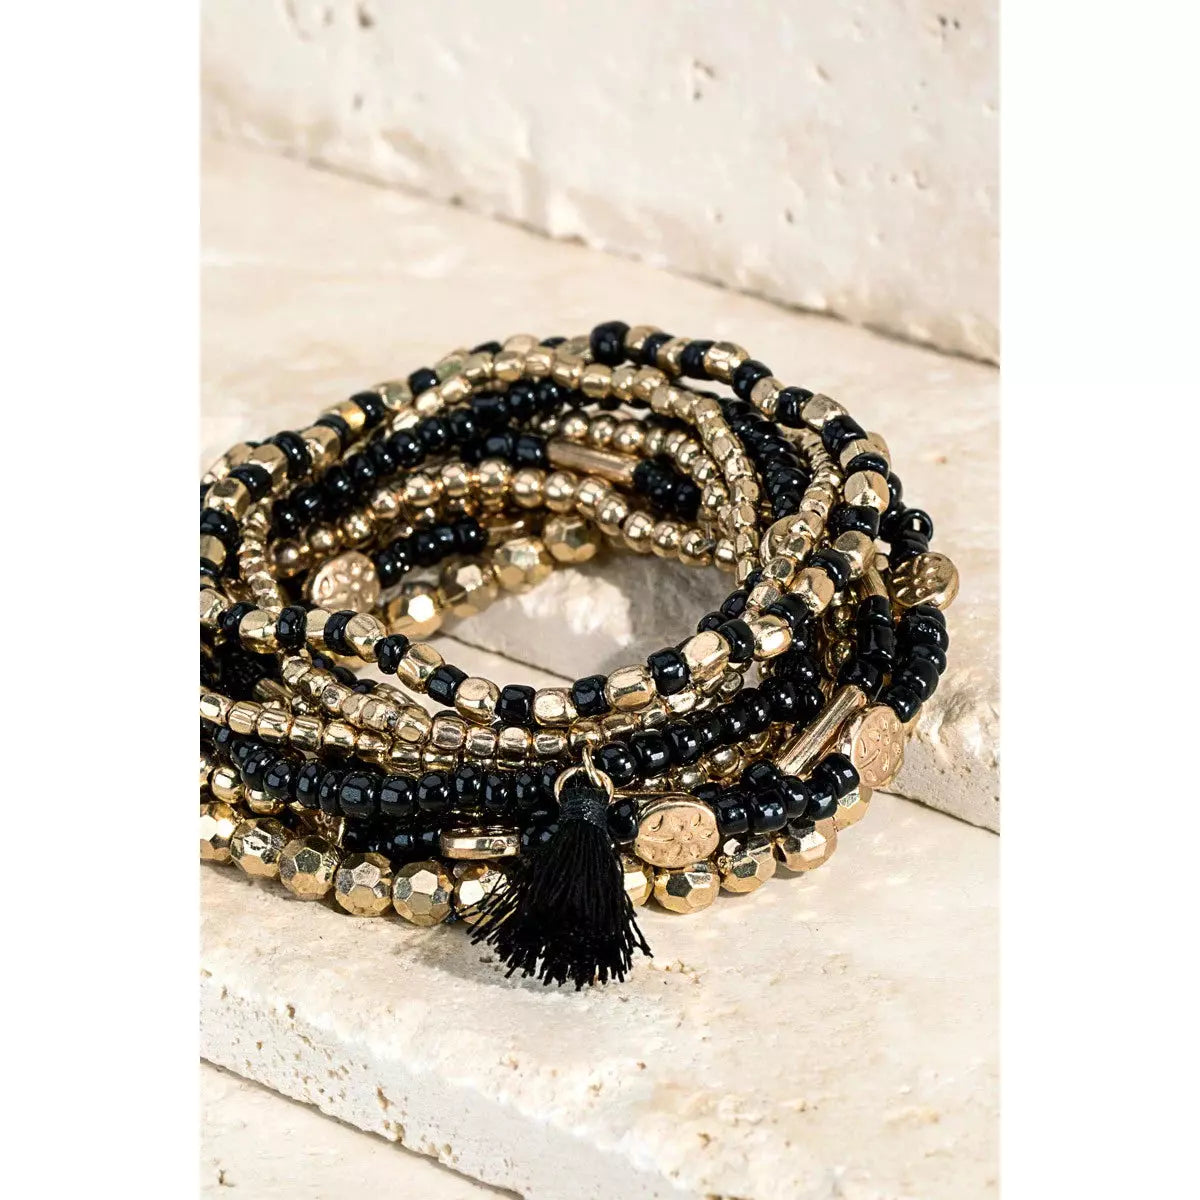 Stacked With Style Bracelet Set (3 Colors)